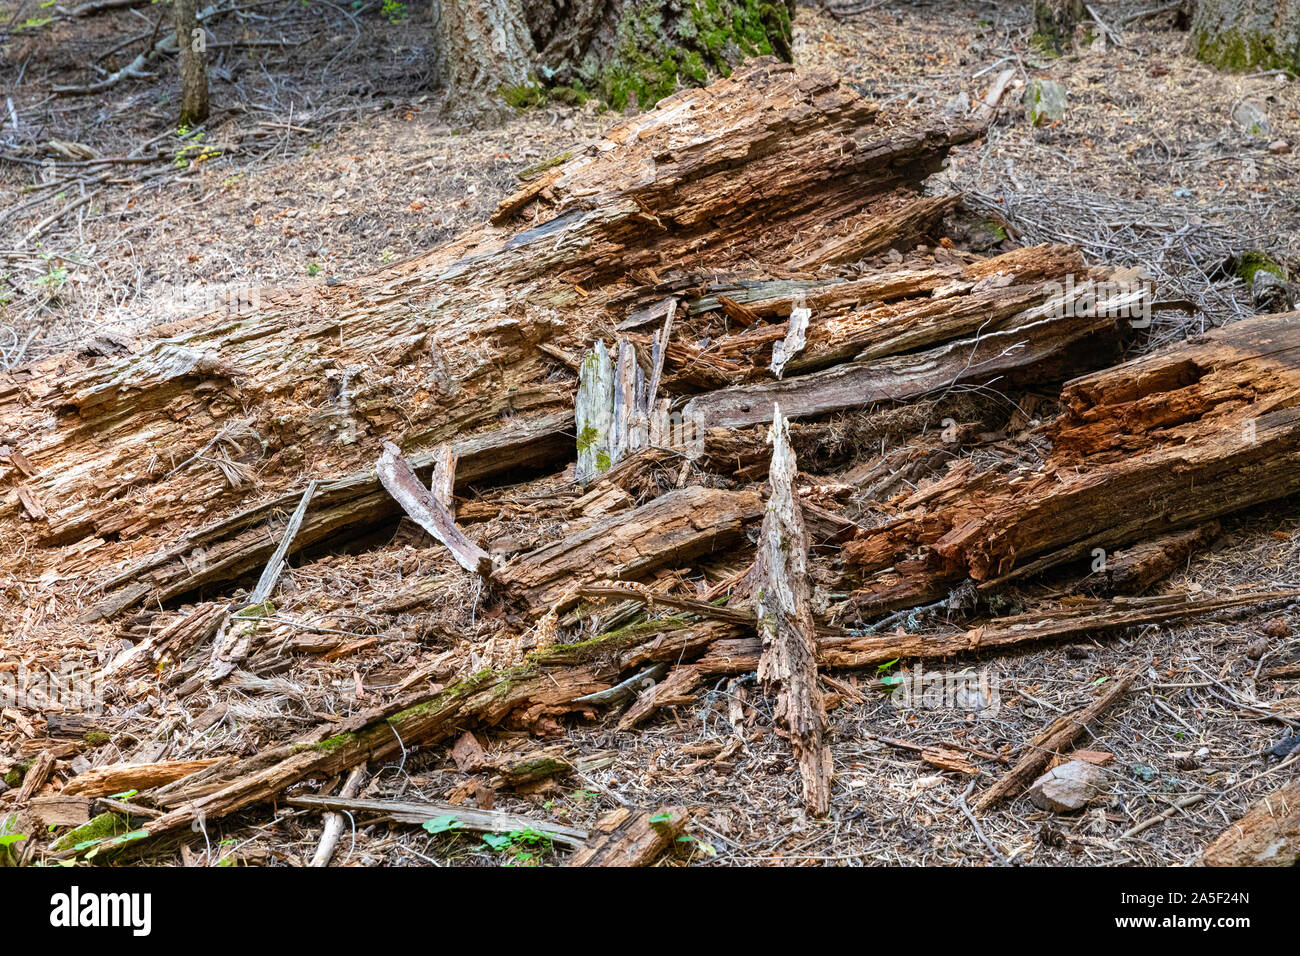 Wood rotting in a forest, Arizona Stock Photo